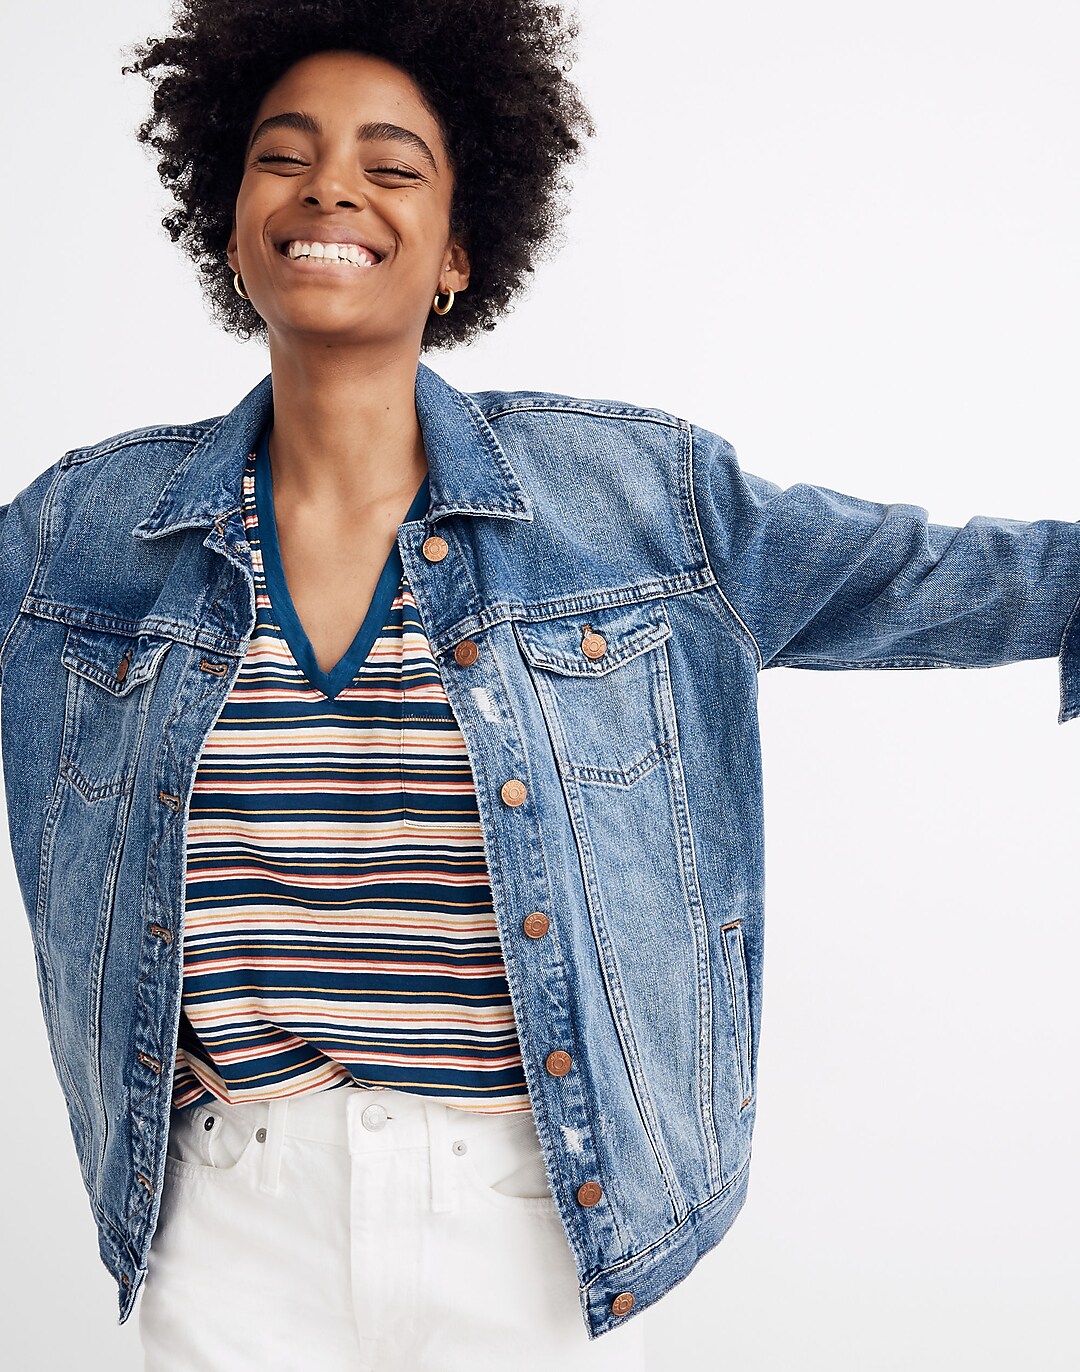 Shoppers Say This Perfect Oversized Denim Jacket Has So Much